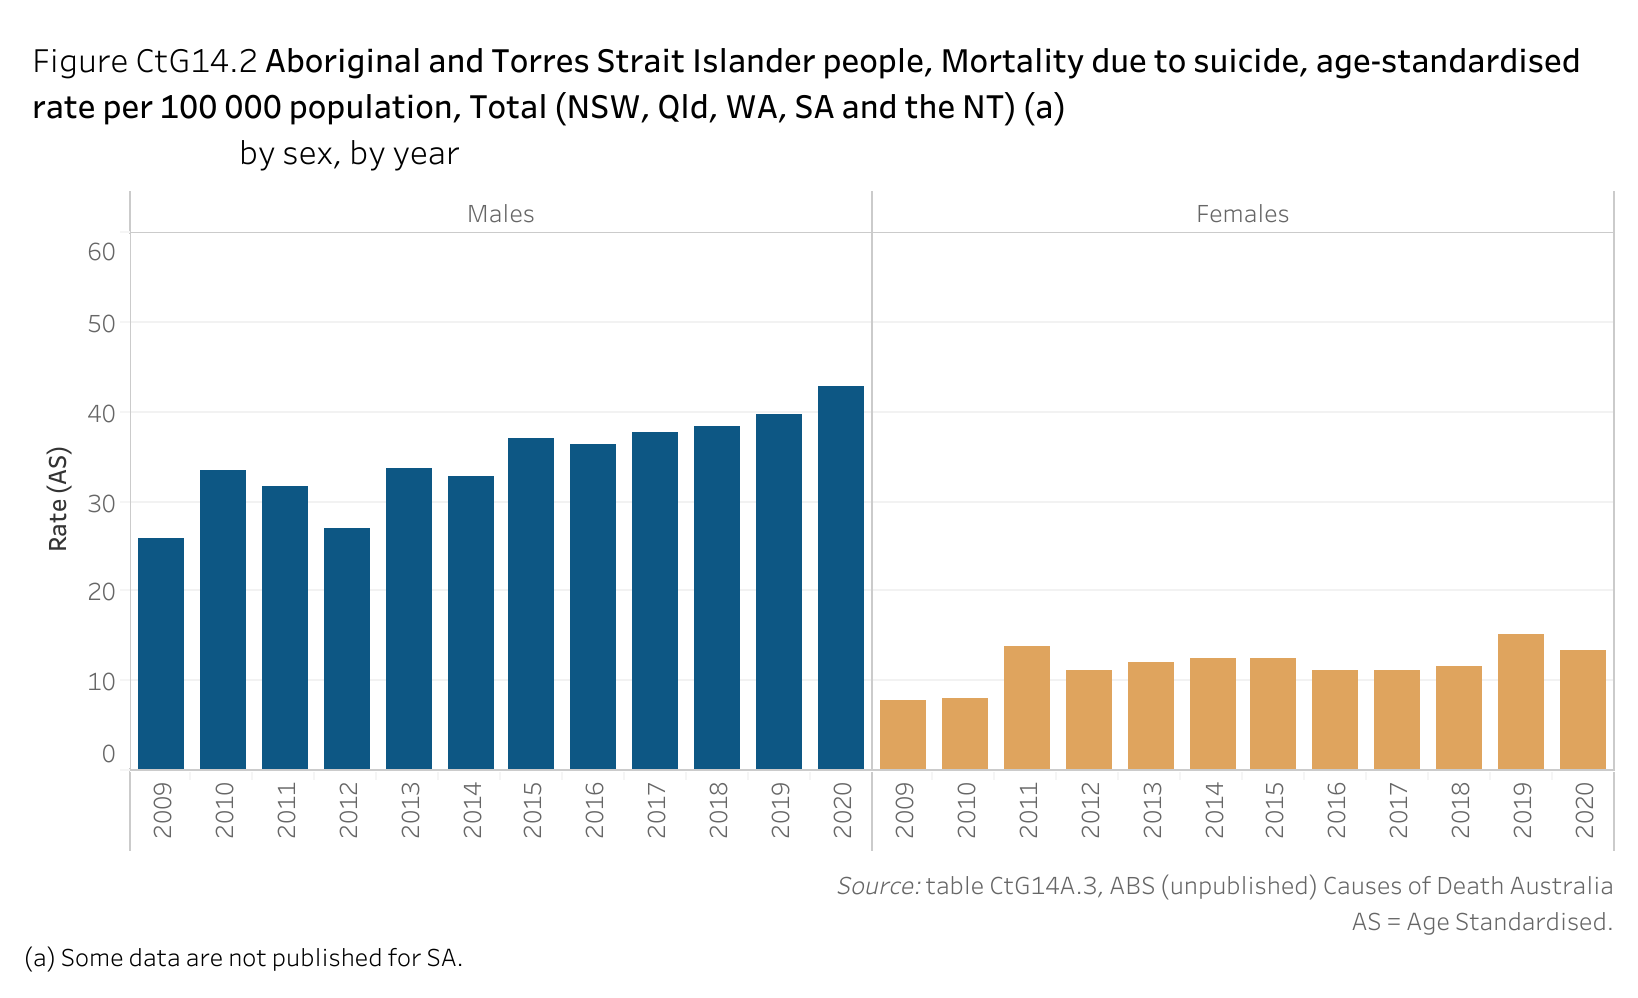 Figure CtG14.2. Bar chart showing the age-standardised rate of mortality due to suicide of Aboriginal and Torres Strait Islander people per 100 000 population (total for NSW, Qld, WA, SA and the NT), by sex and by year. Data table of figure CtG14.2 is below.